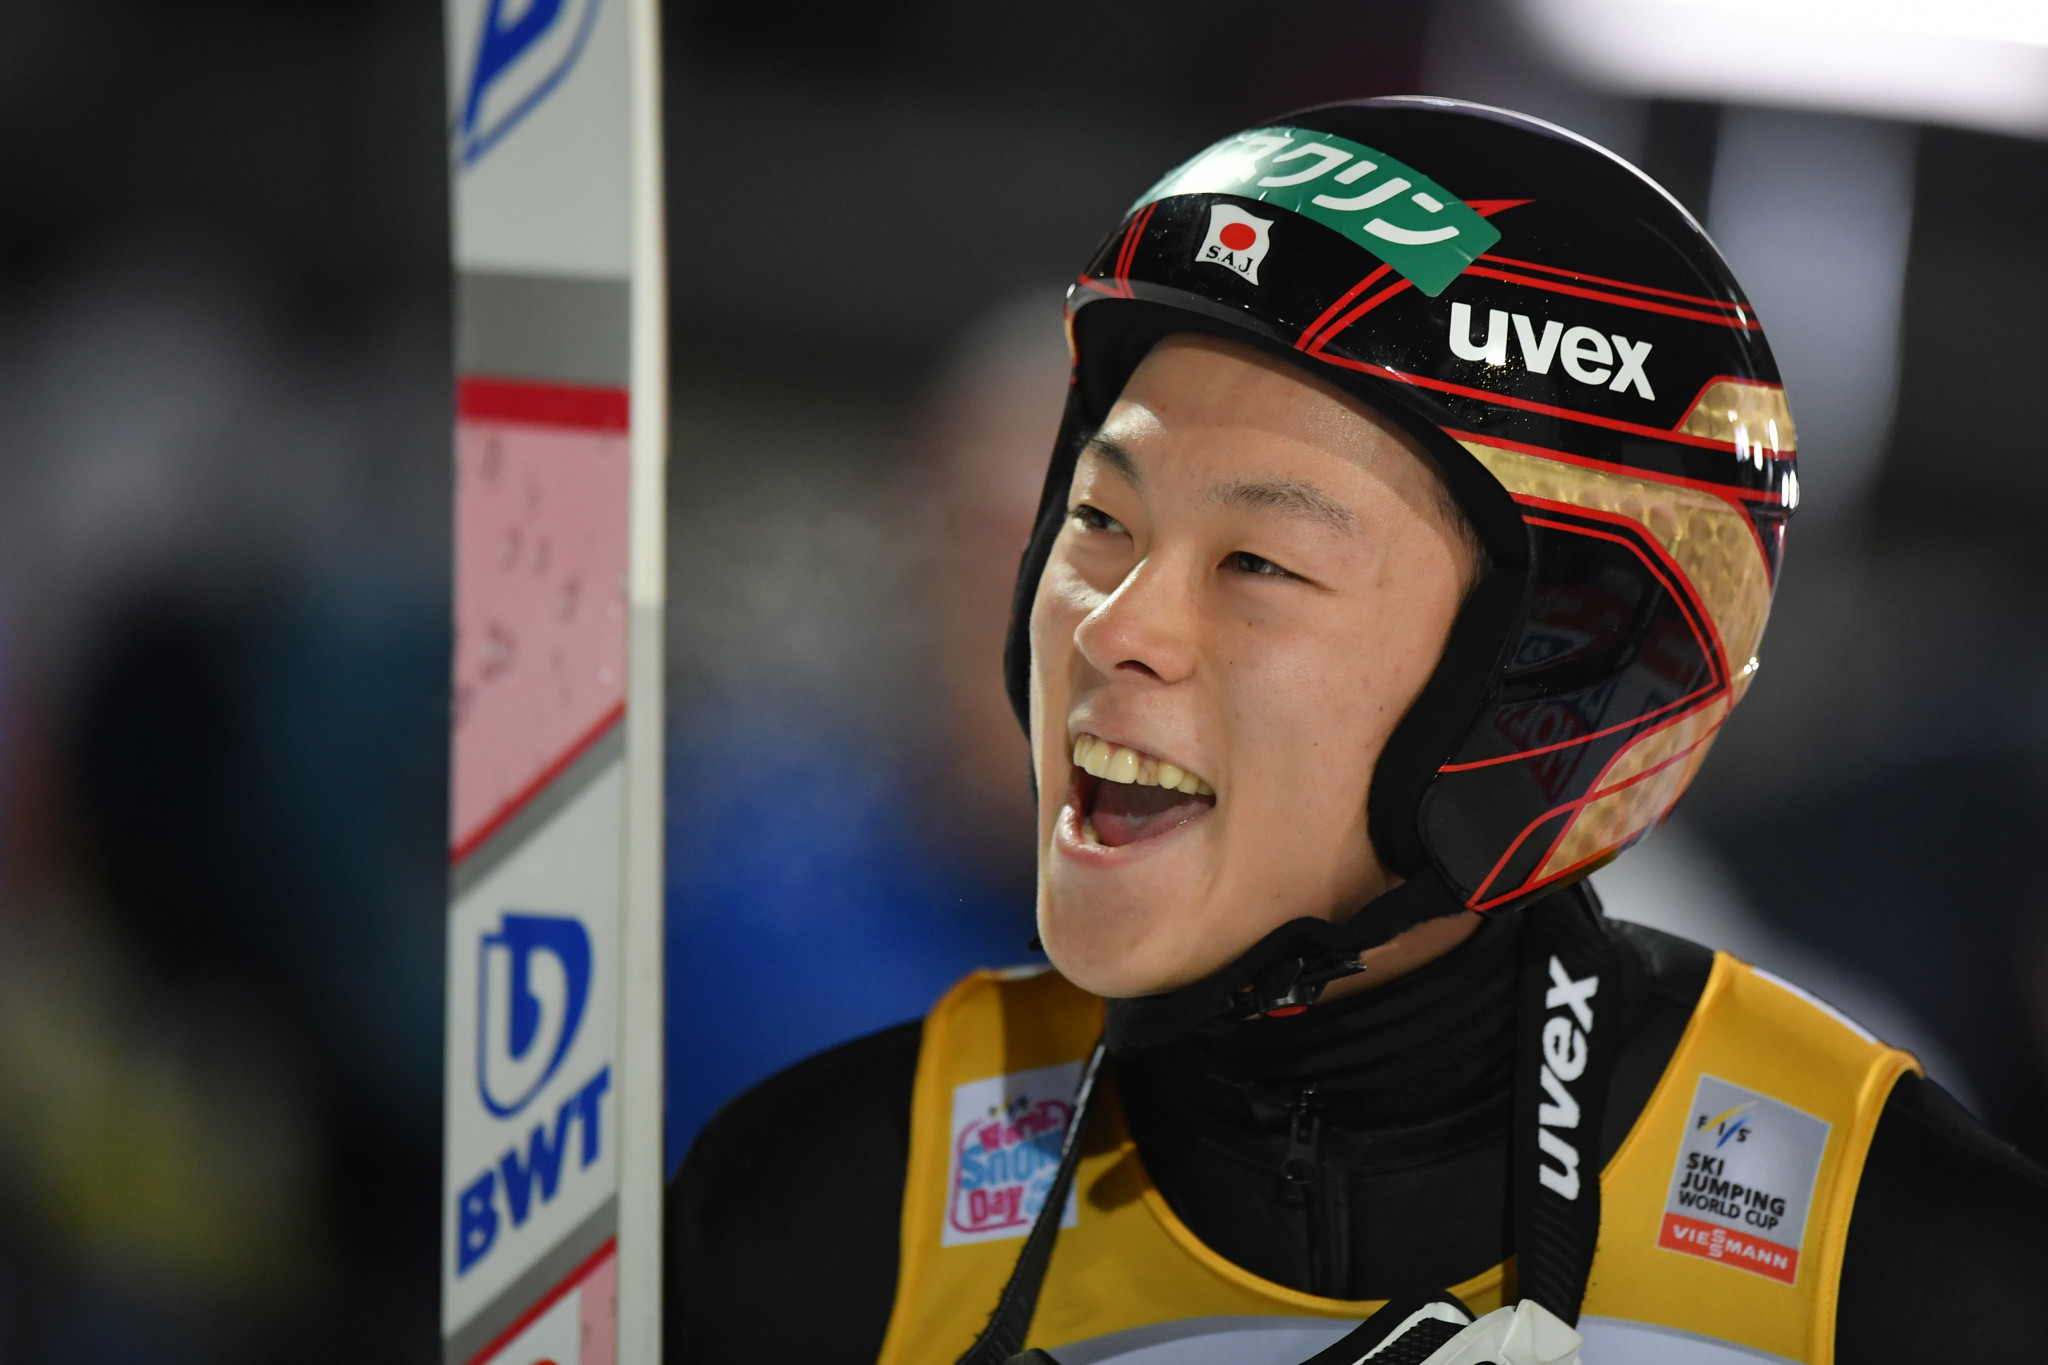 Japan's Kobayashi continues dominant form to win FIS Ski Jumping World Cup event in Oberstdorf